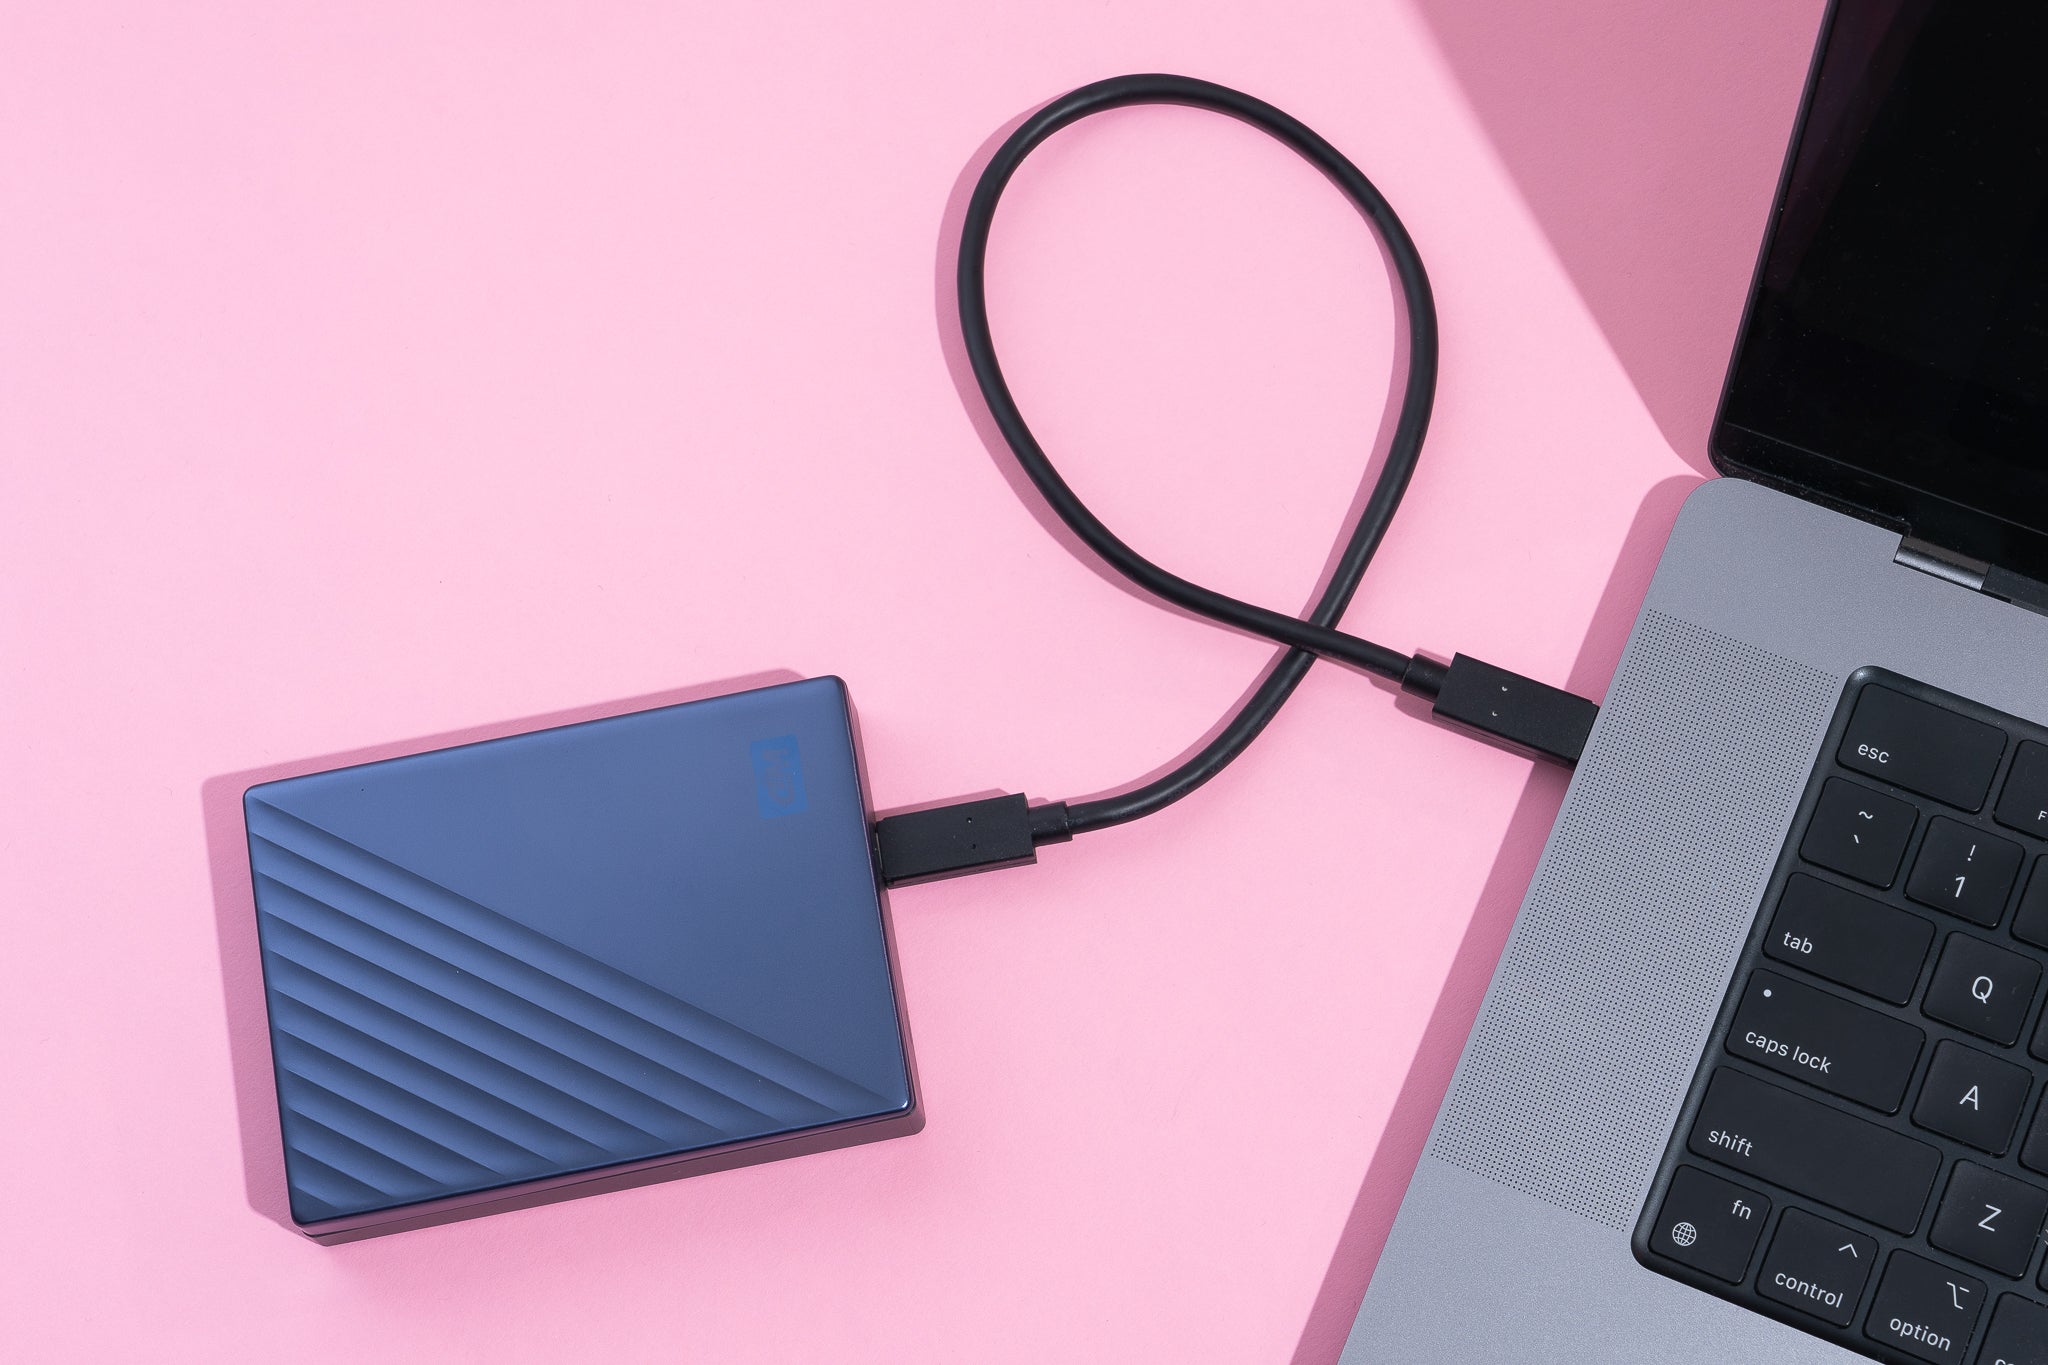 BudgetBoost External Hard Drive - Expand Your Storage Without Breaking the Bank